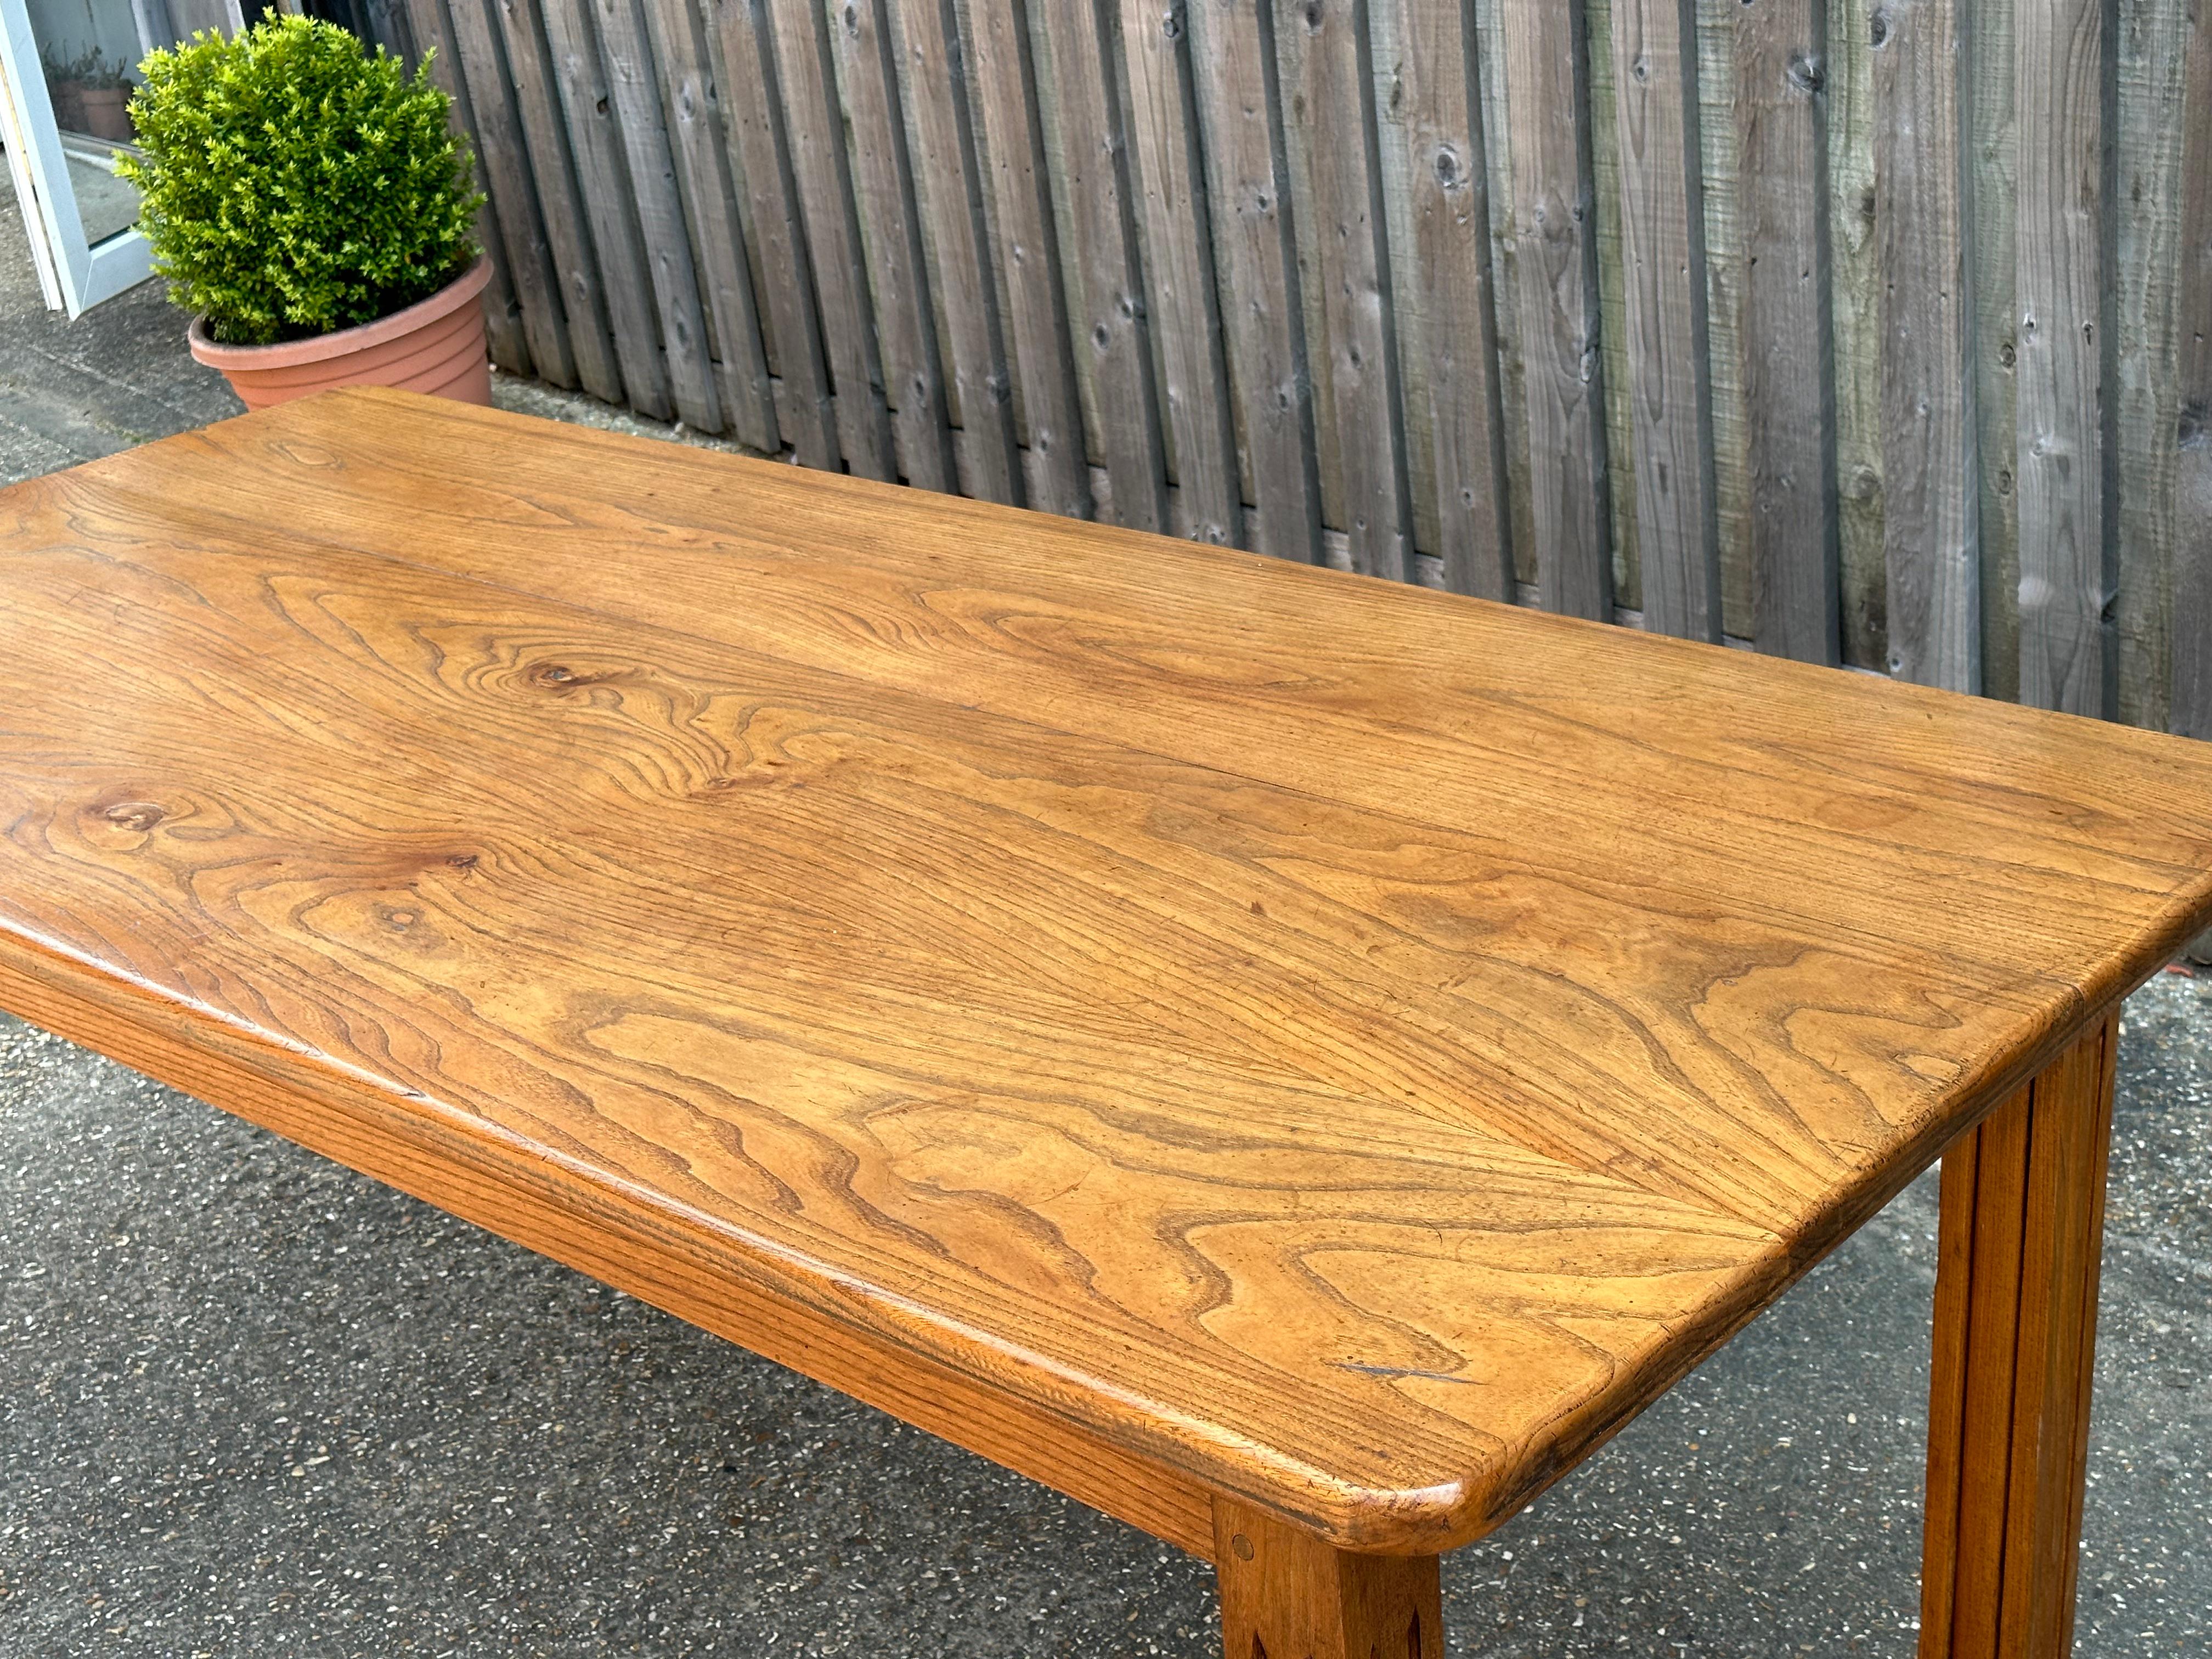 Early 20th Century elm, three plank table top. The top has stunning patination and figured grain. The table sits on a sturdy apron with four square carved legs. The table is a perfect eight-seater and would work well in a kitchen or dining room. The